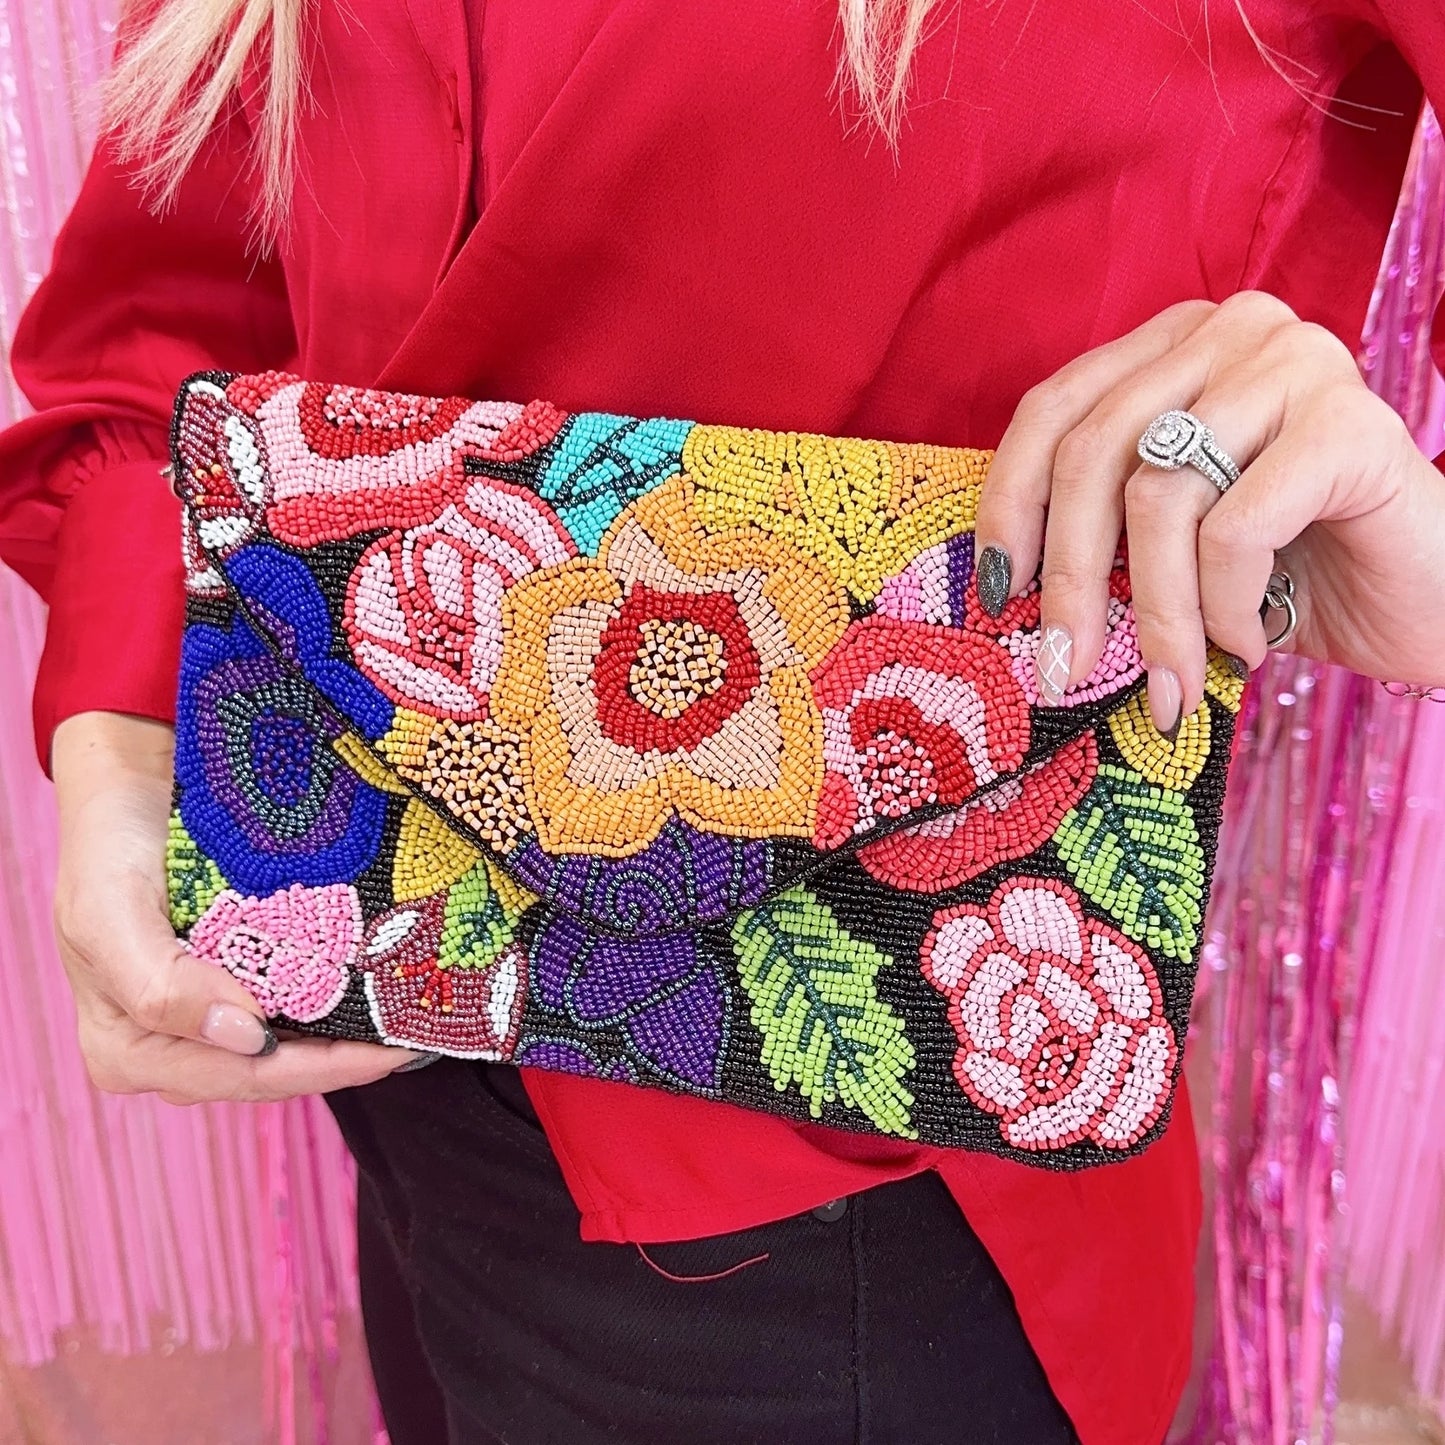 The colorful beaded bag is made with intricate black, red, pink, green and blue stones. It is designed with flowers and is held by a woman in a red shirt with a beautiful ring in her hand.